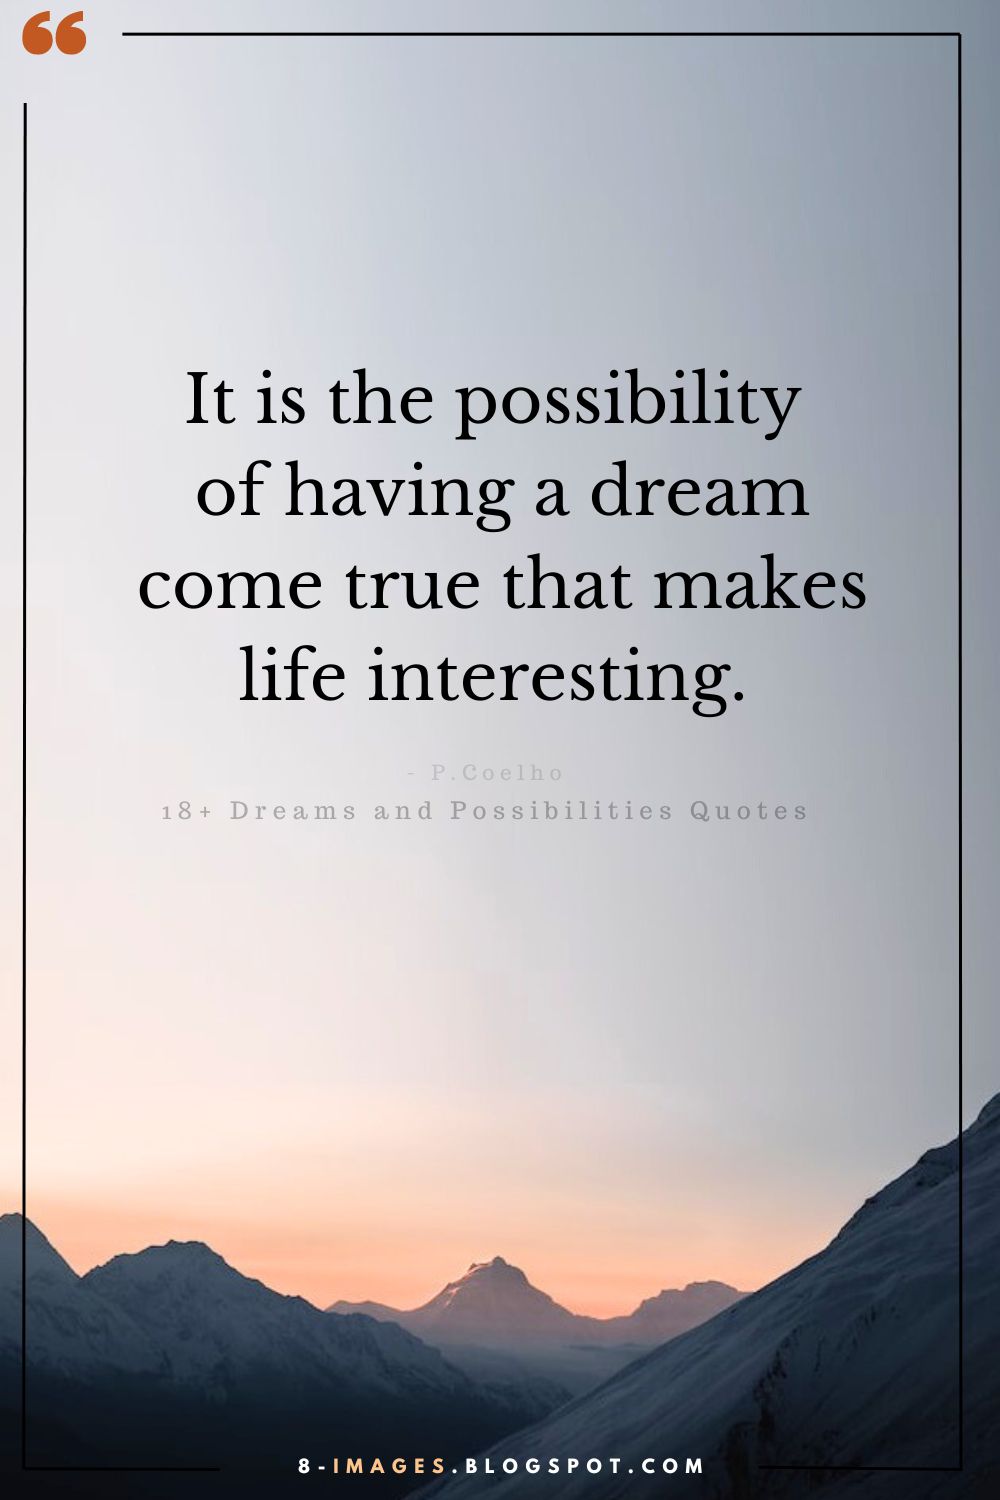 It Is The Possibility Of Having A Dream Come True That Makes Life Interesting.